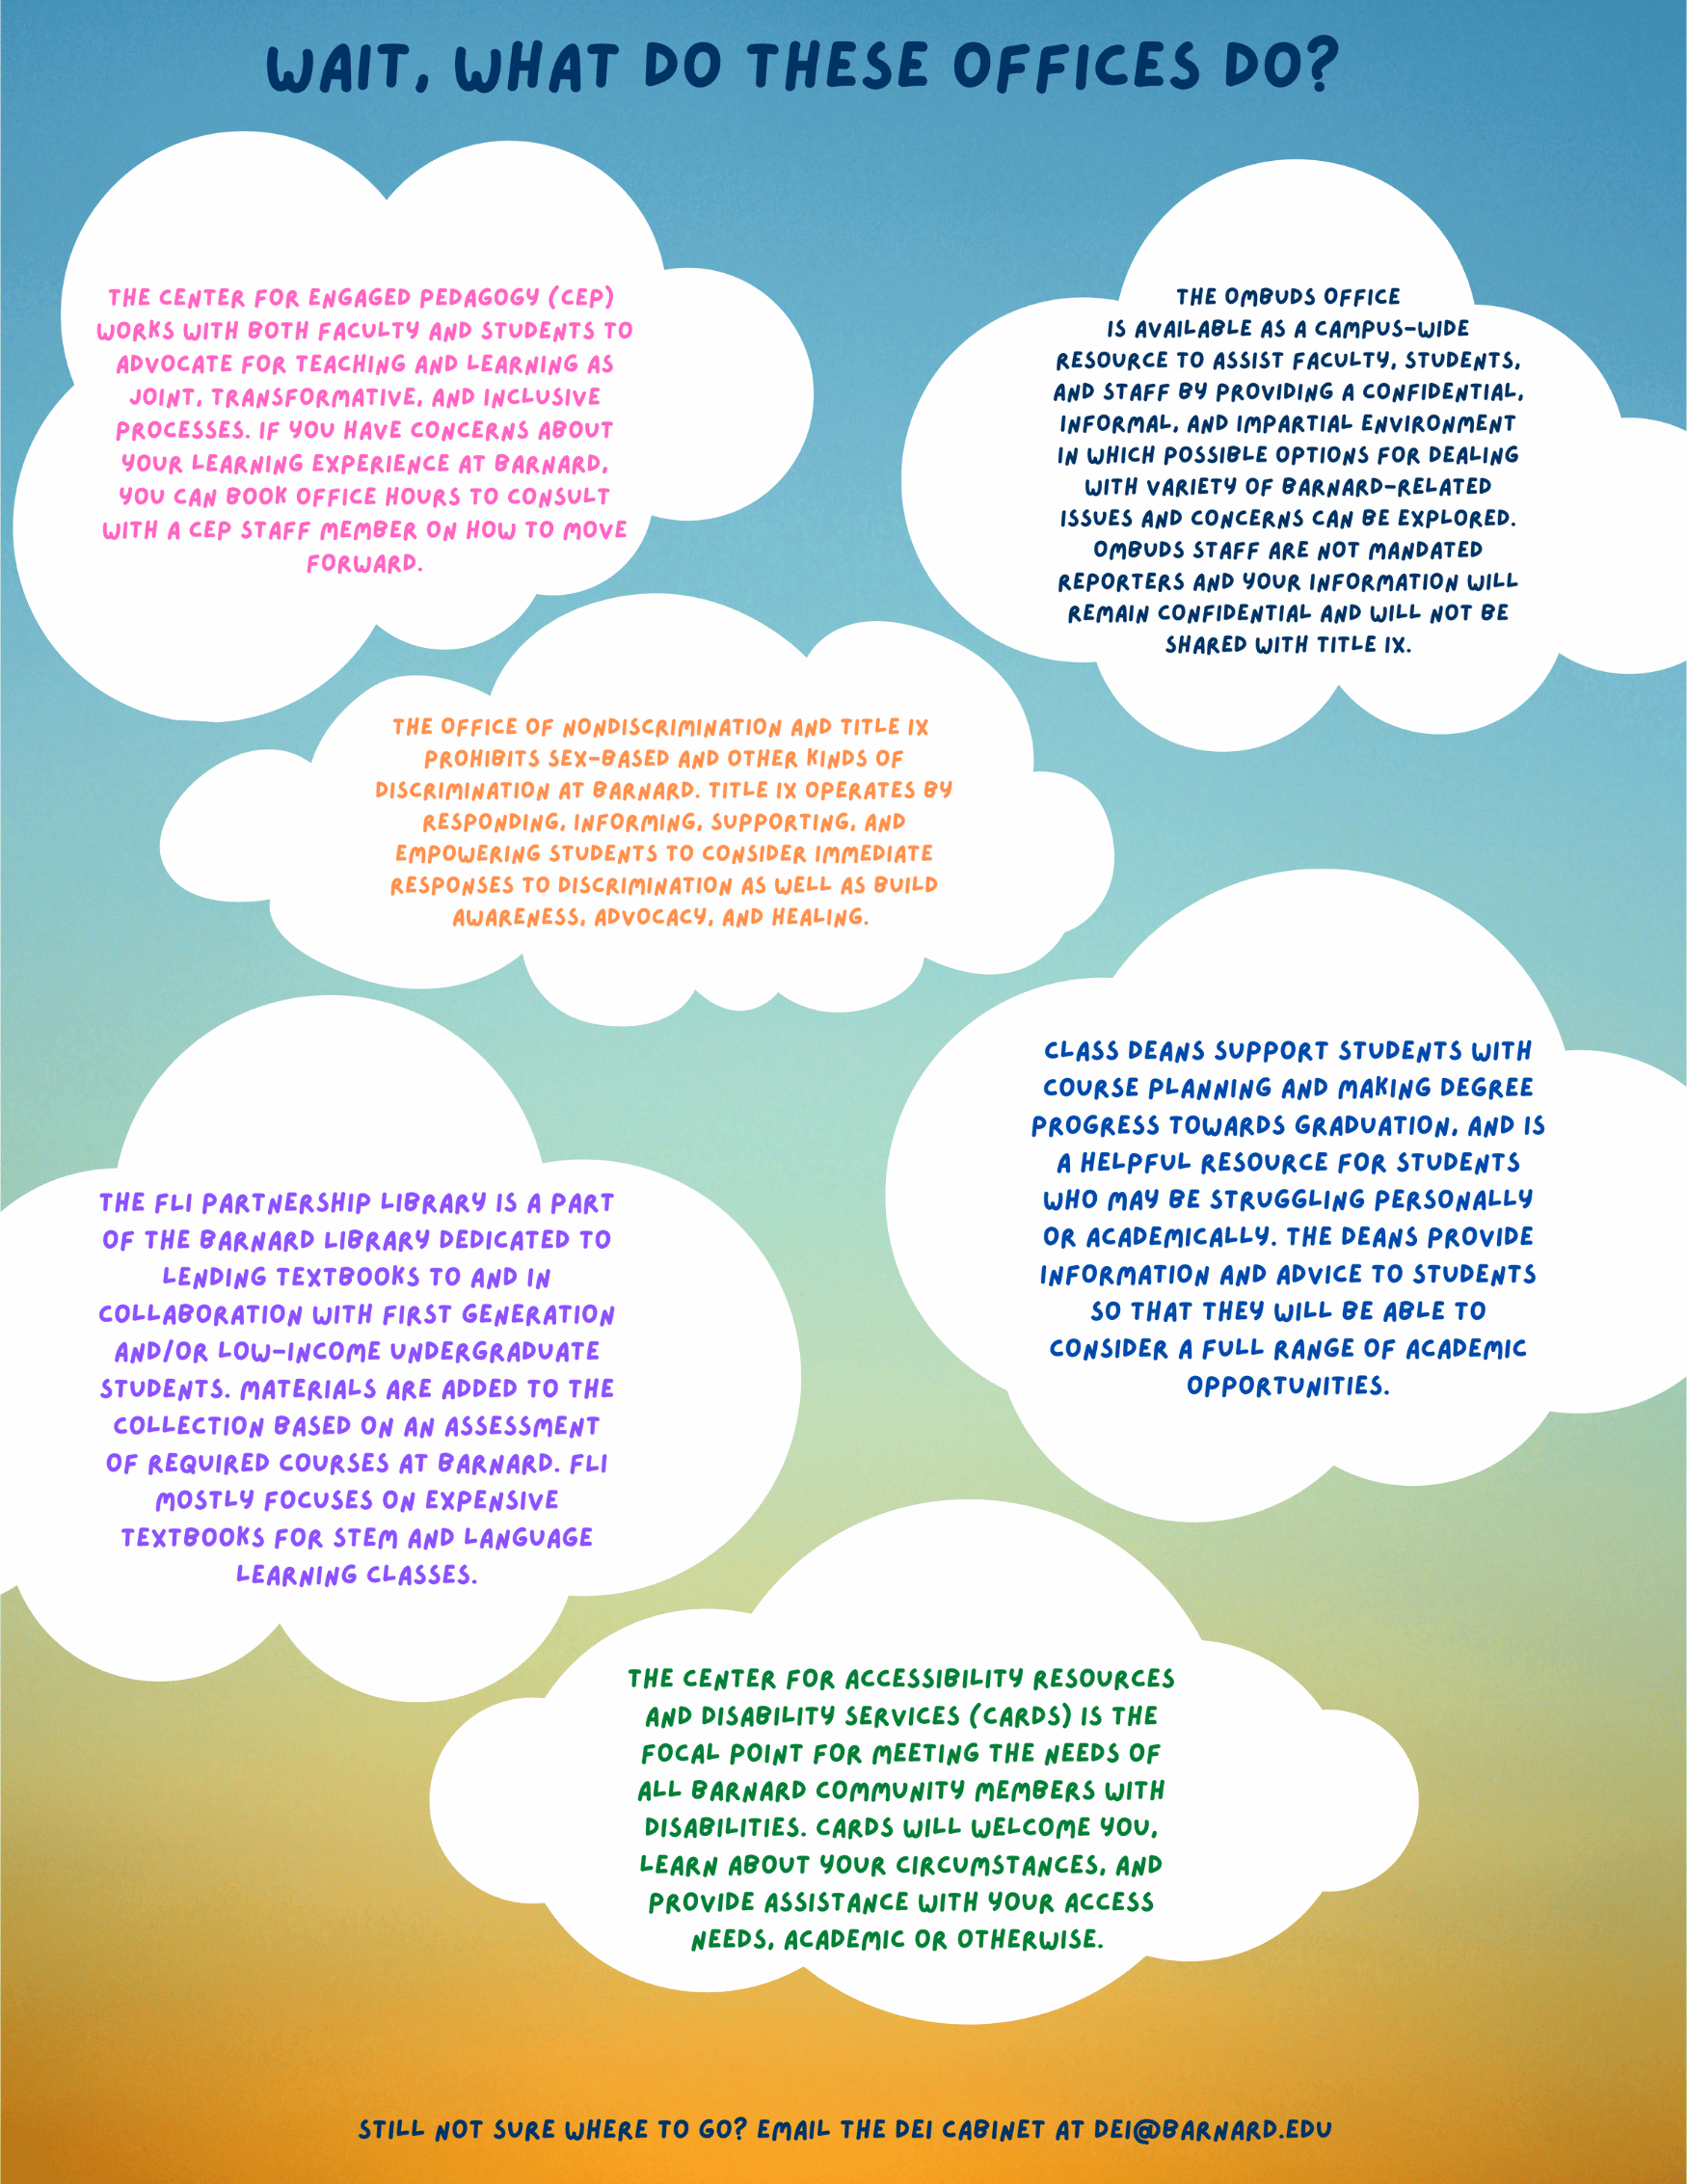 Six white clouds on a rainbow gradient background. Information in colorful text explains different offices and resources at Barnard.